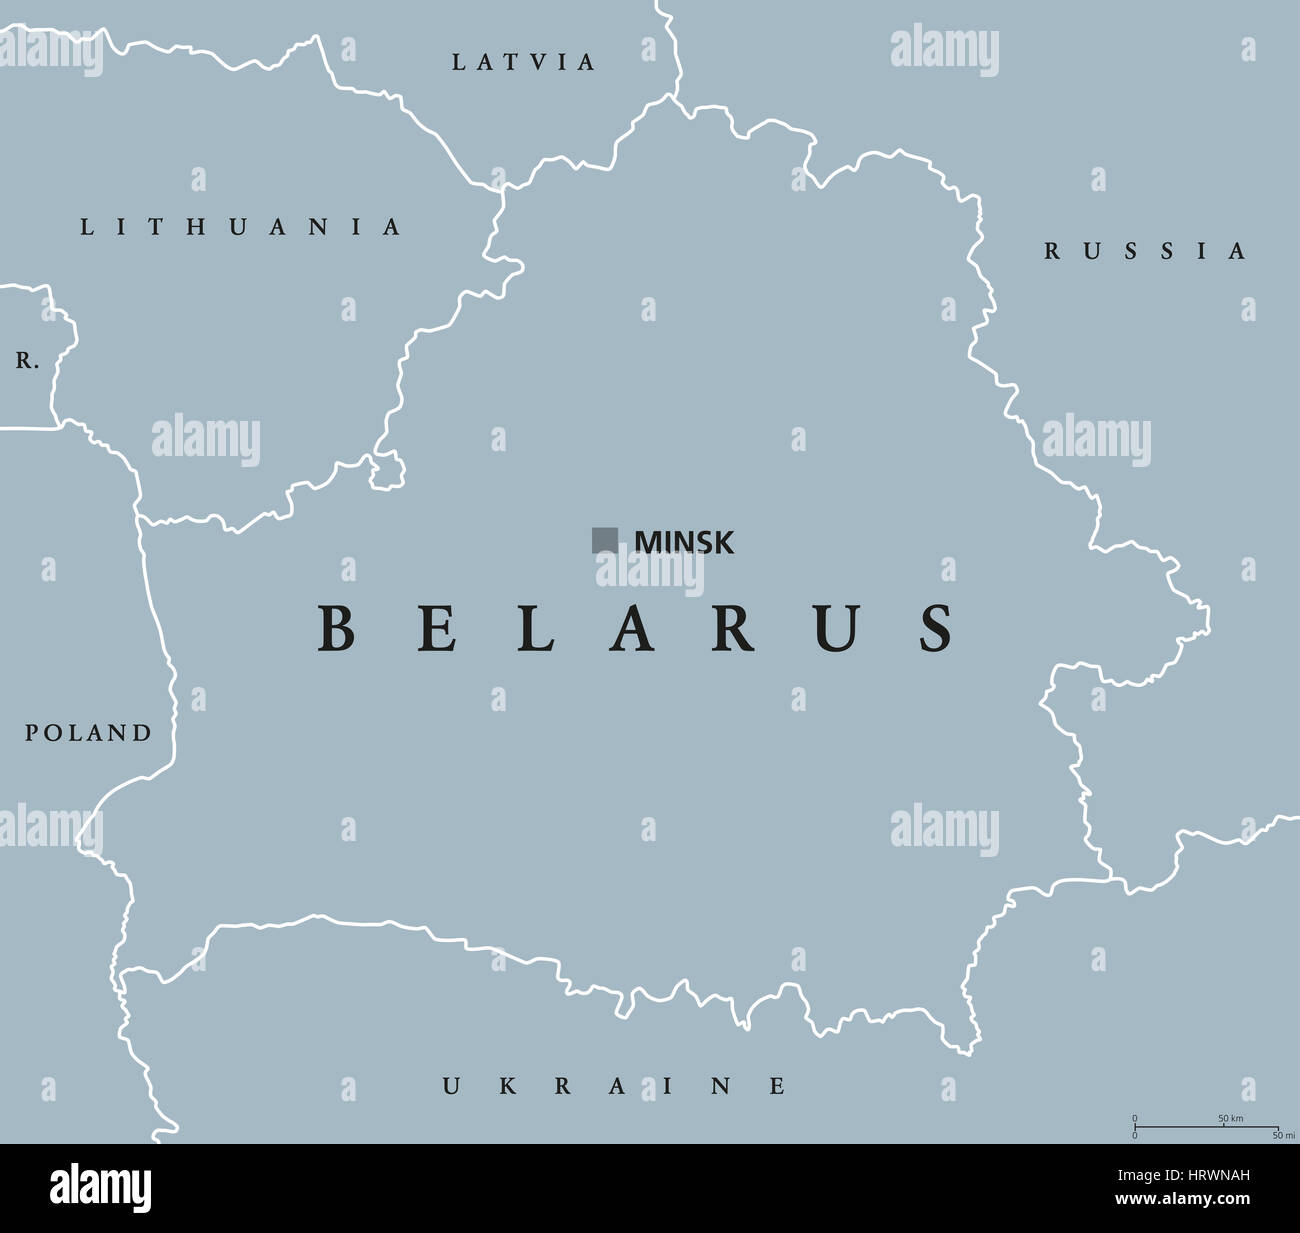 Belarus political map with capital Minsk, national borders and neighbors. Formerly known as Byelorussia. Republic in Eastern Europe. Stock Photo